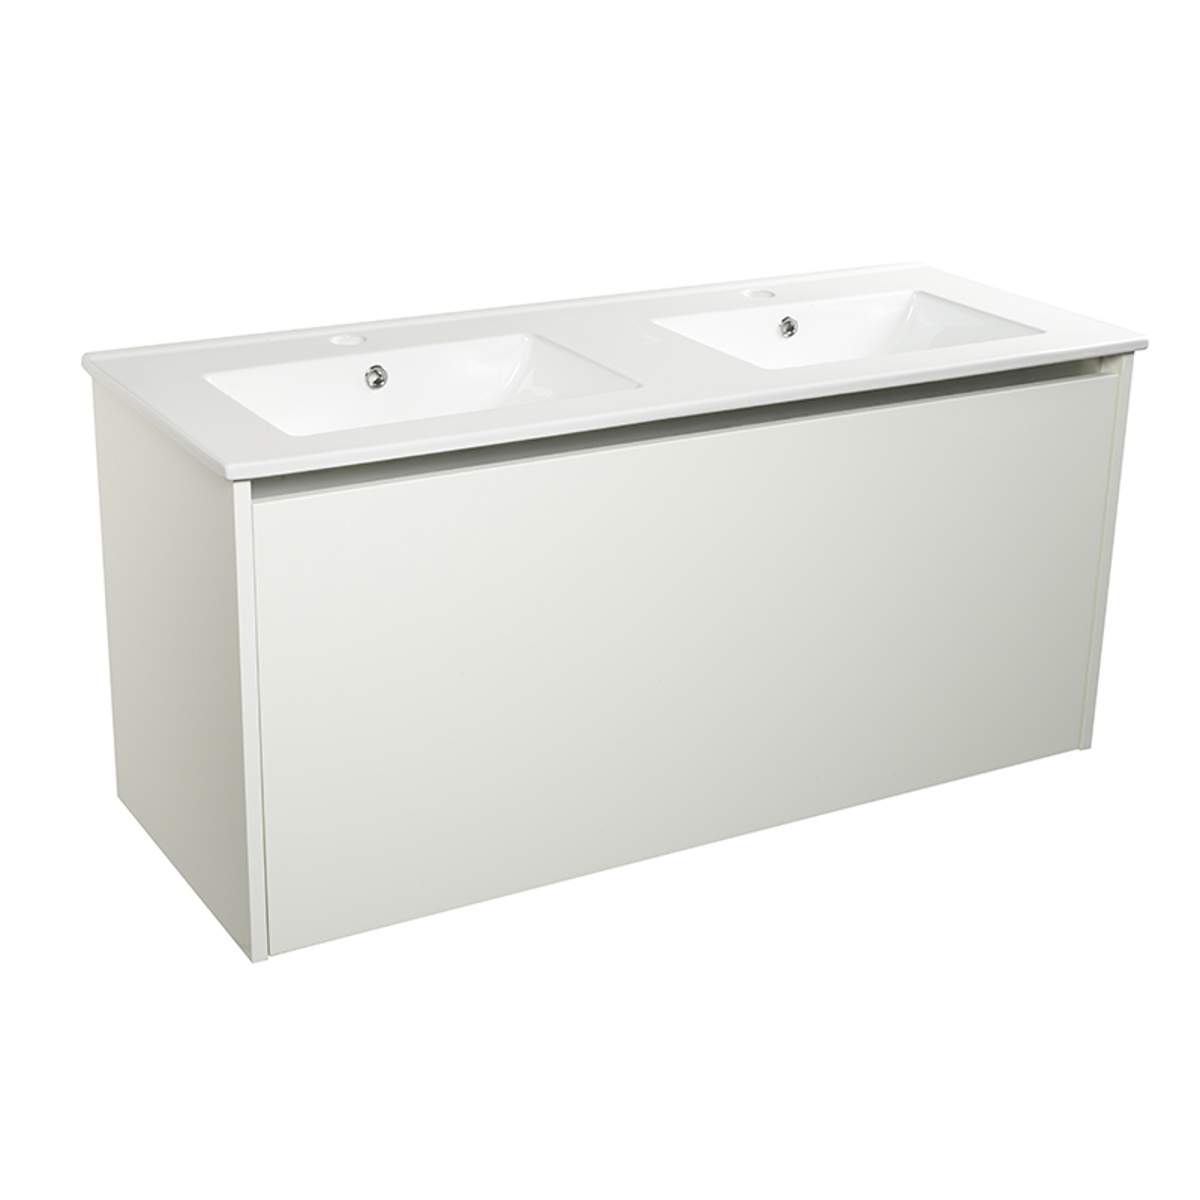 JTP City 1200 Unit with Internal Drawer, Sensor and Bottom Light in White (CYWM1203W+CY1200BS)